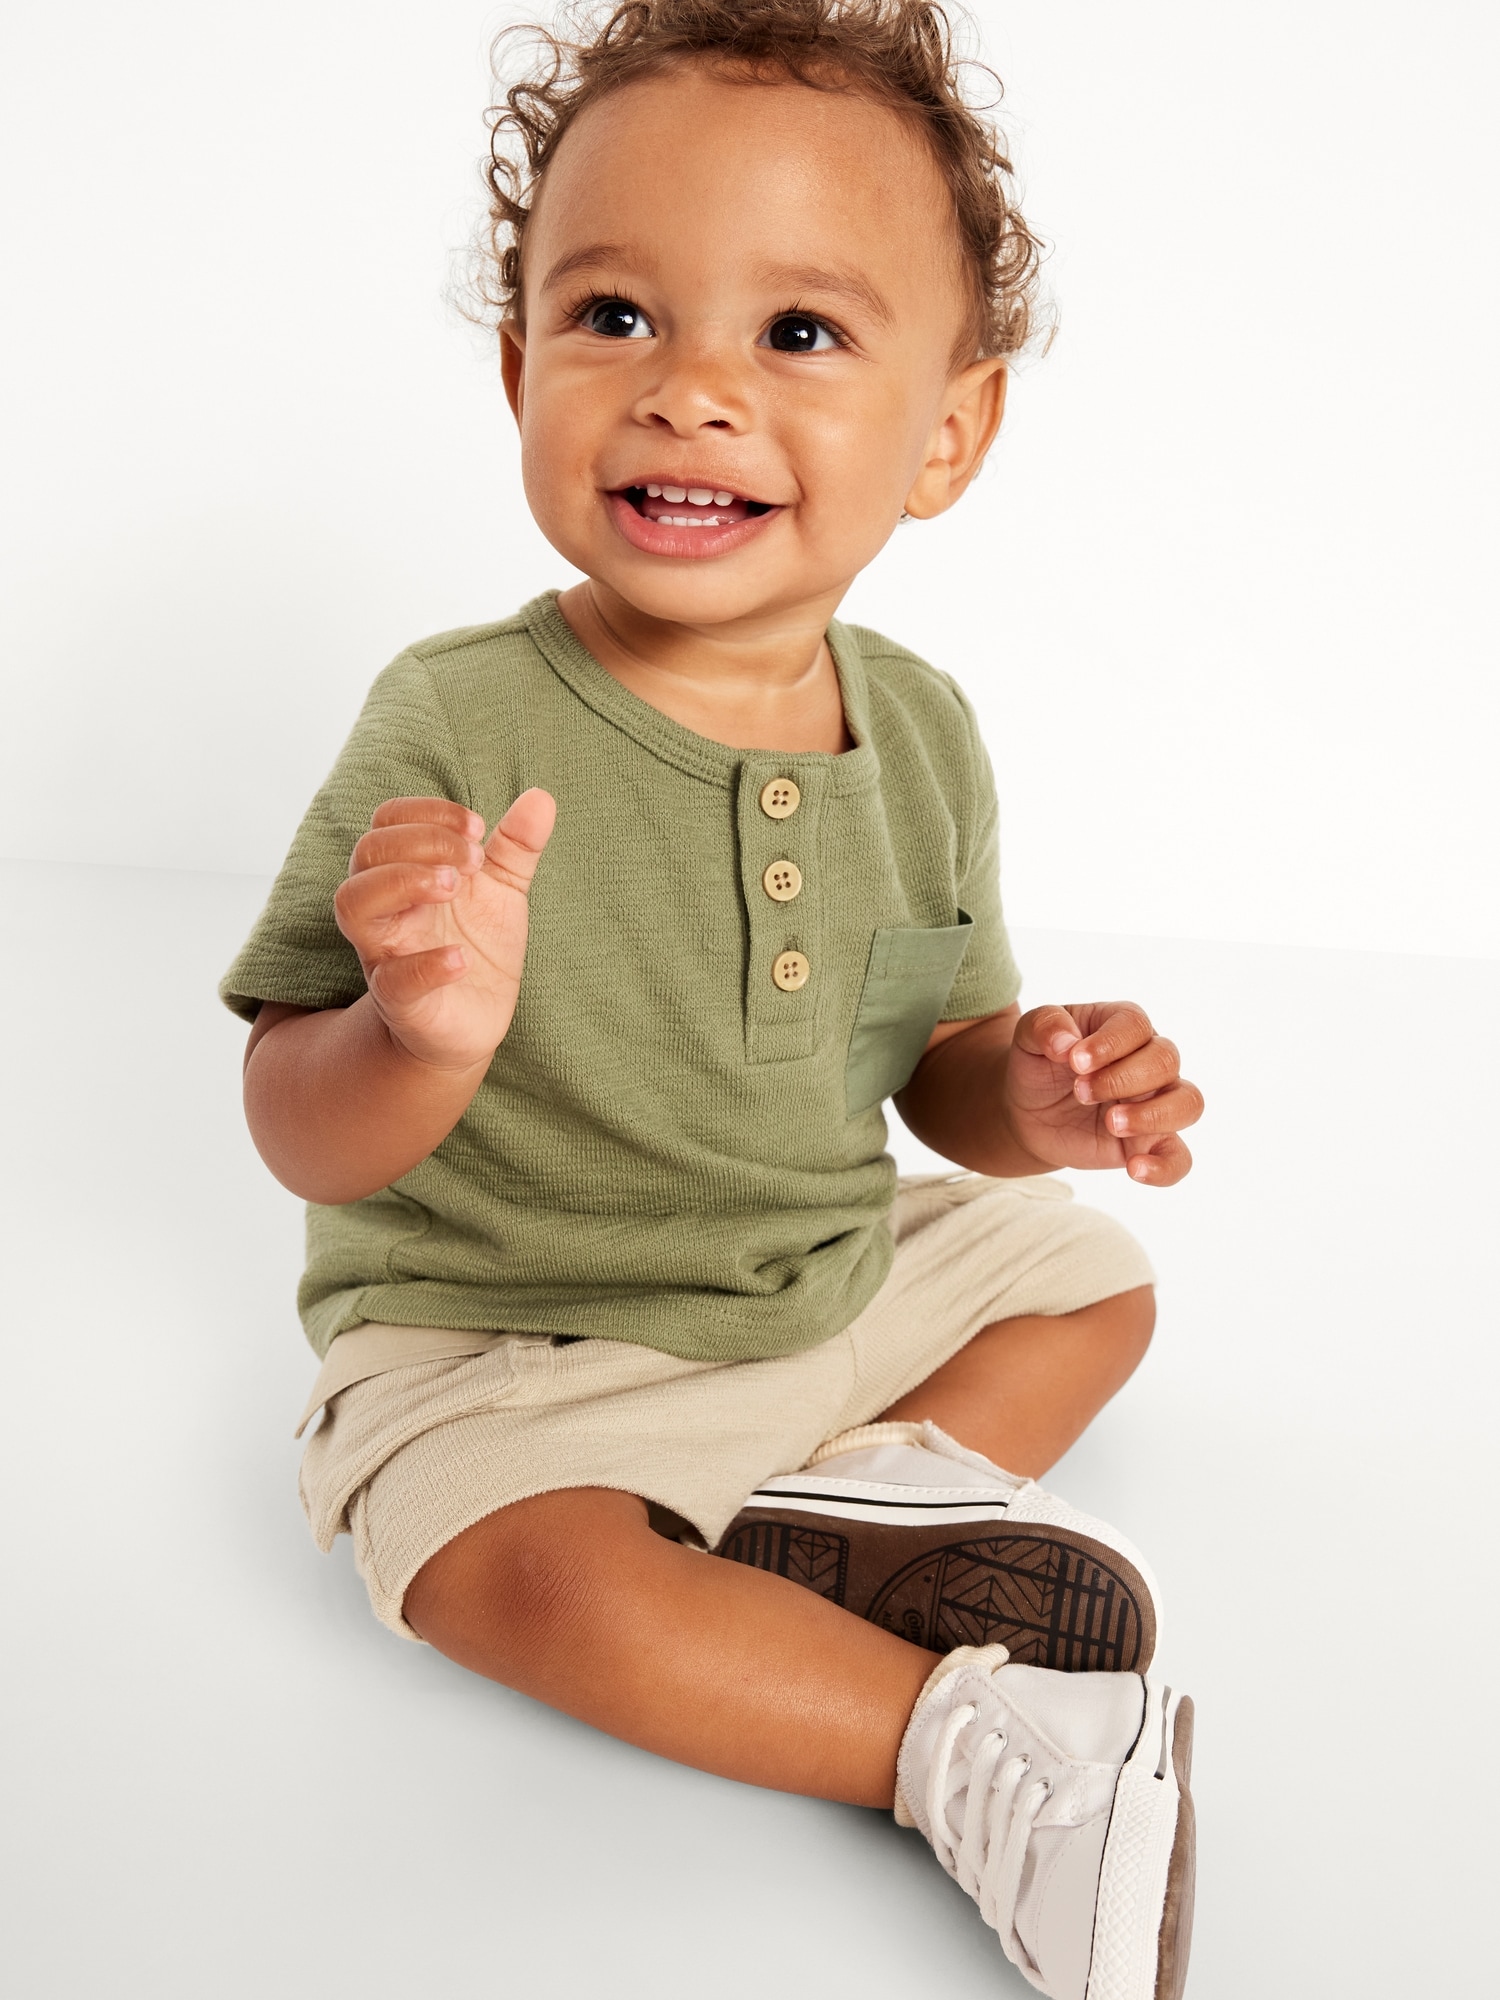 Textured Henley Pocket T-Shirt and Shorts Set for Baby